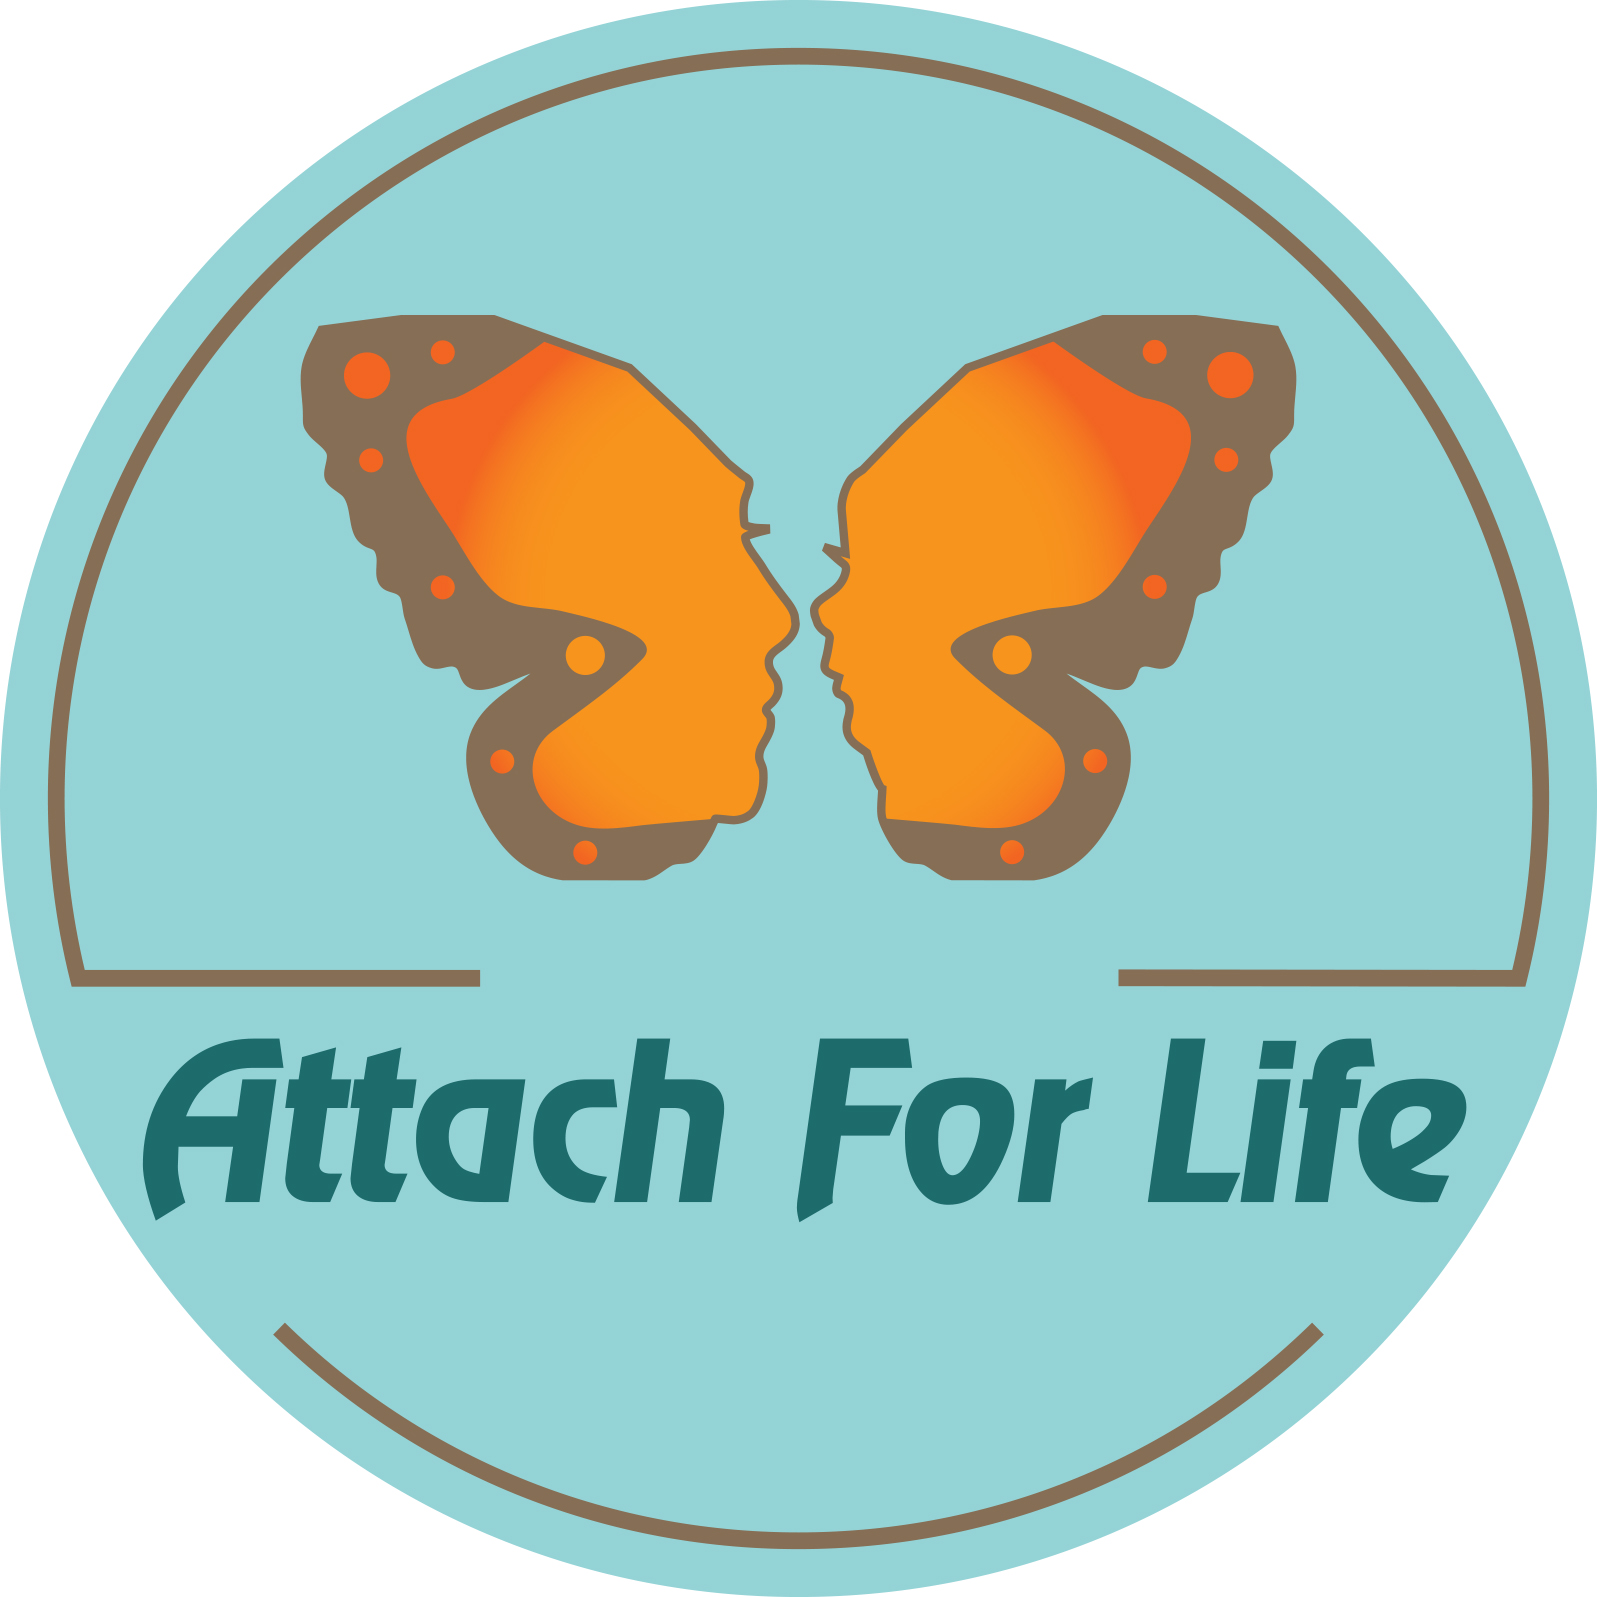 Attach For Life